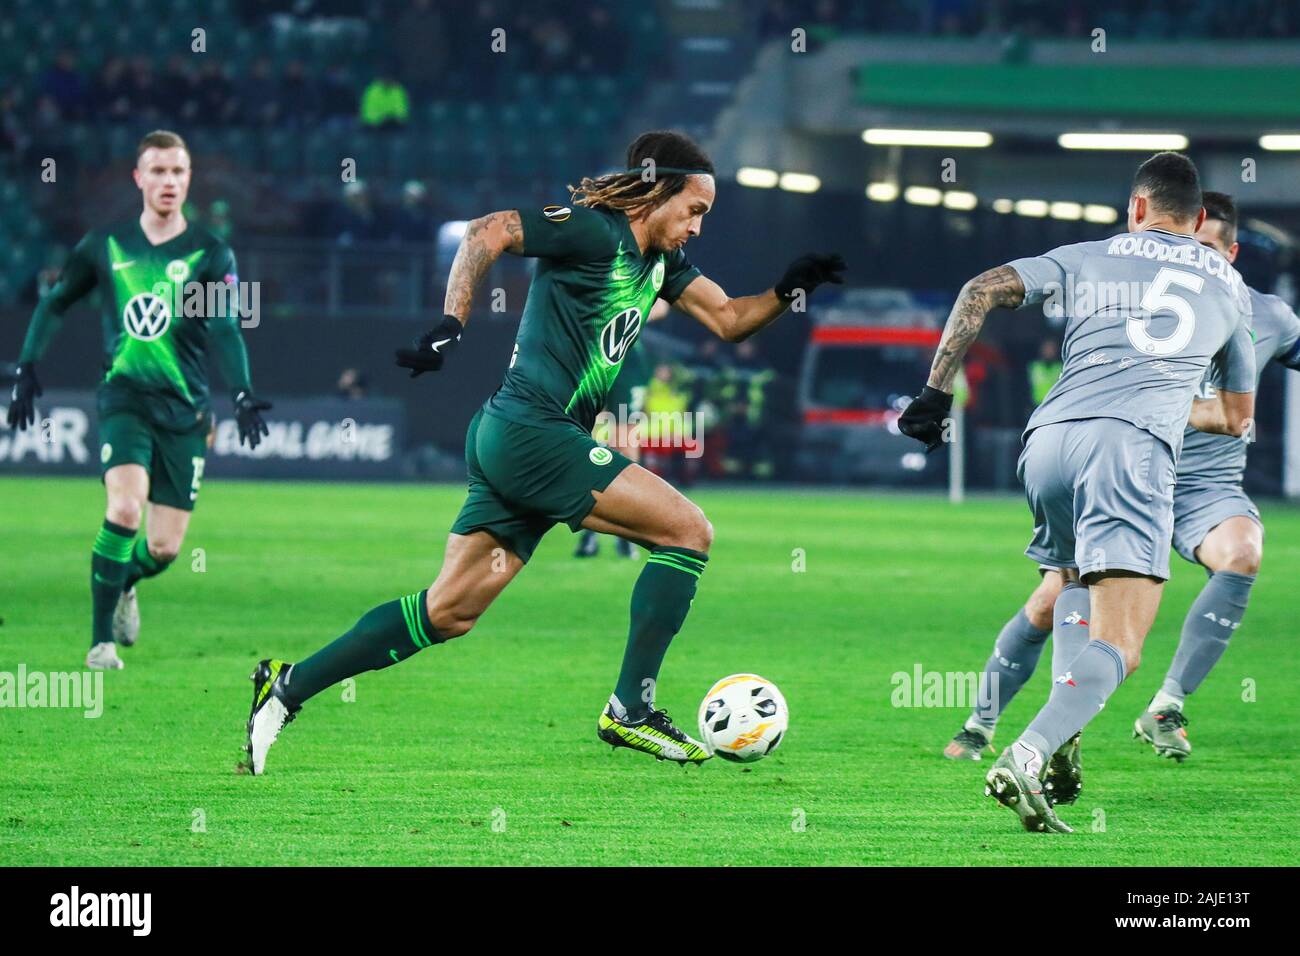 Wolfsburg, Germany, December 12, 2019: Kevin Mbabu of VfL Wolfsburg in action during the UEFA Europa League match between Wolfsburg and Saint Etienne Stock Photo